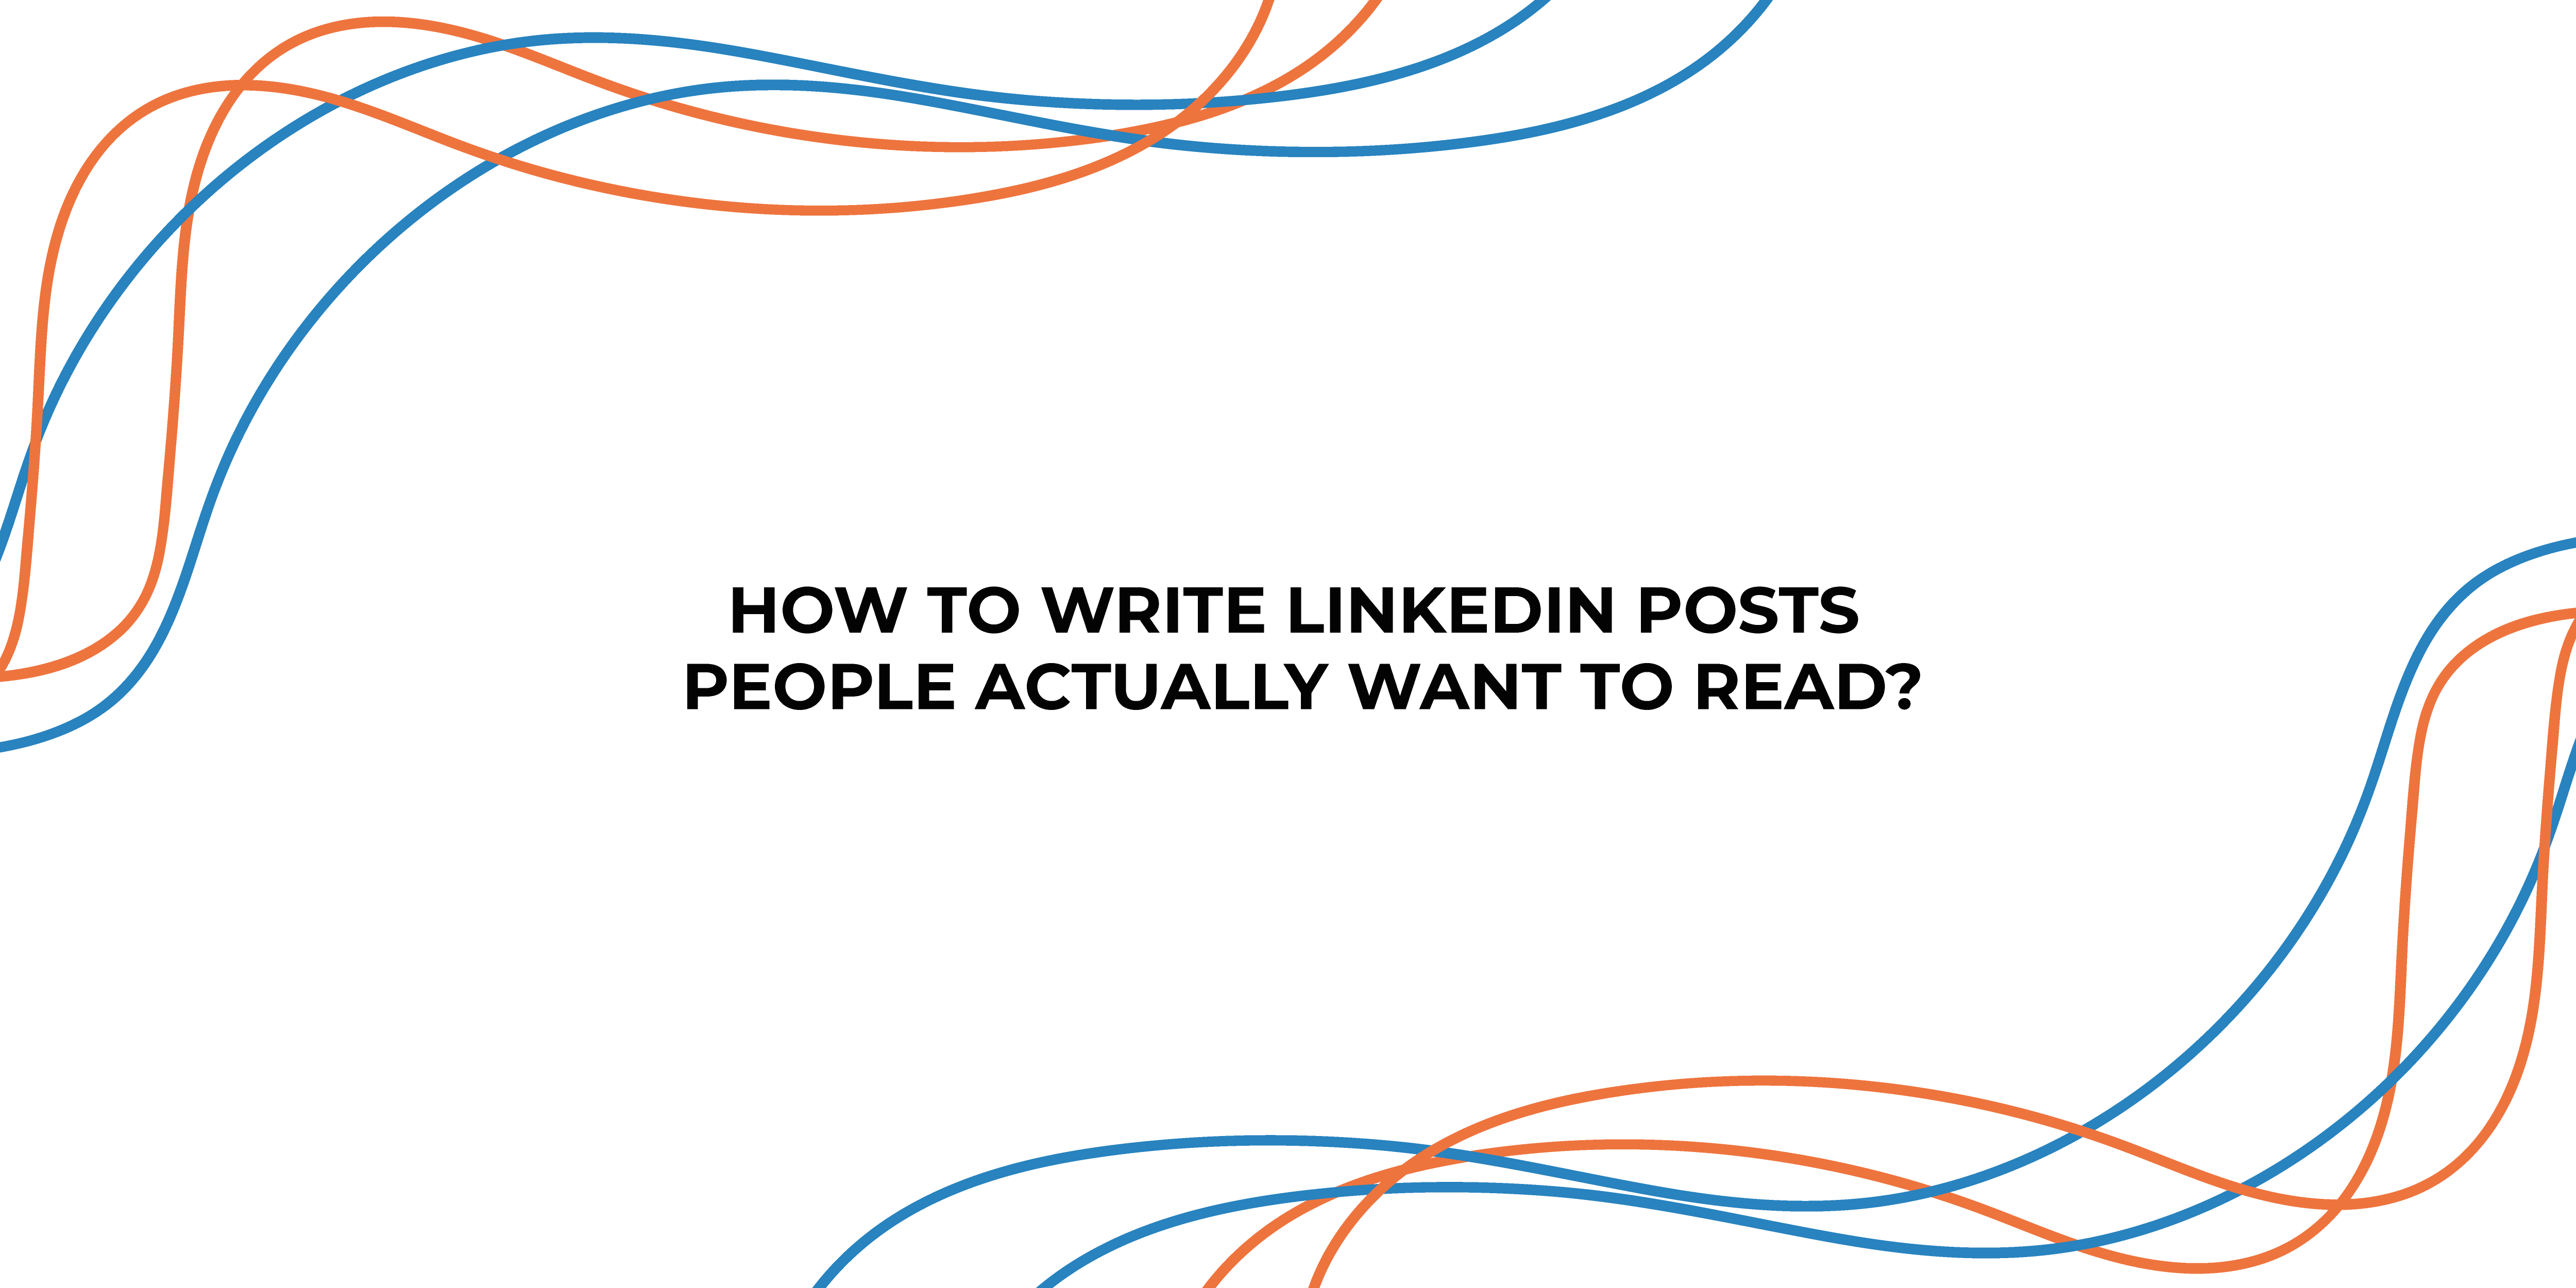 How to write LinkedIn posts people actually want to read?